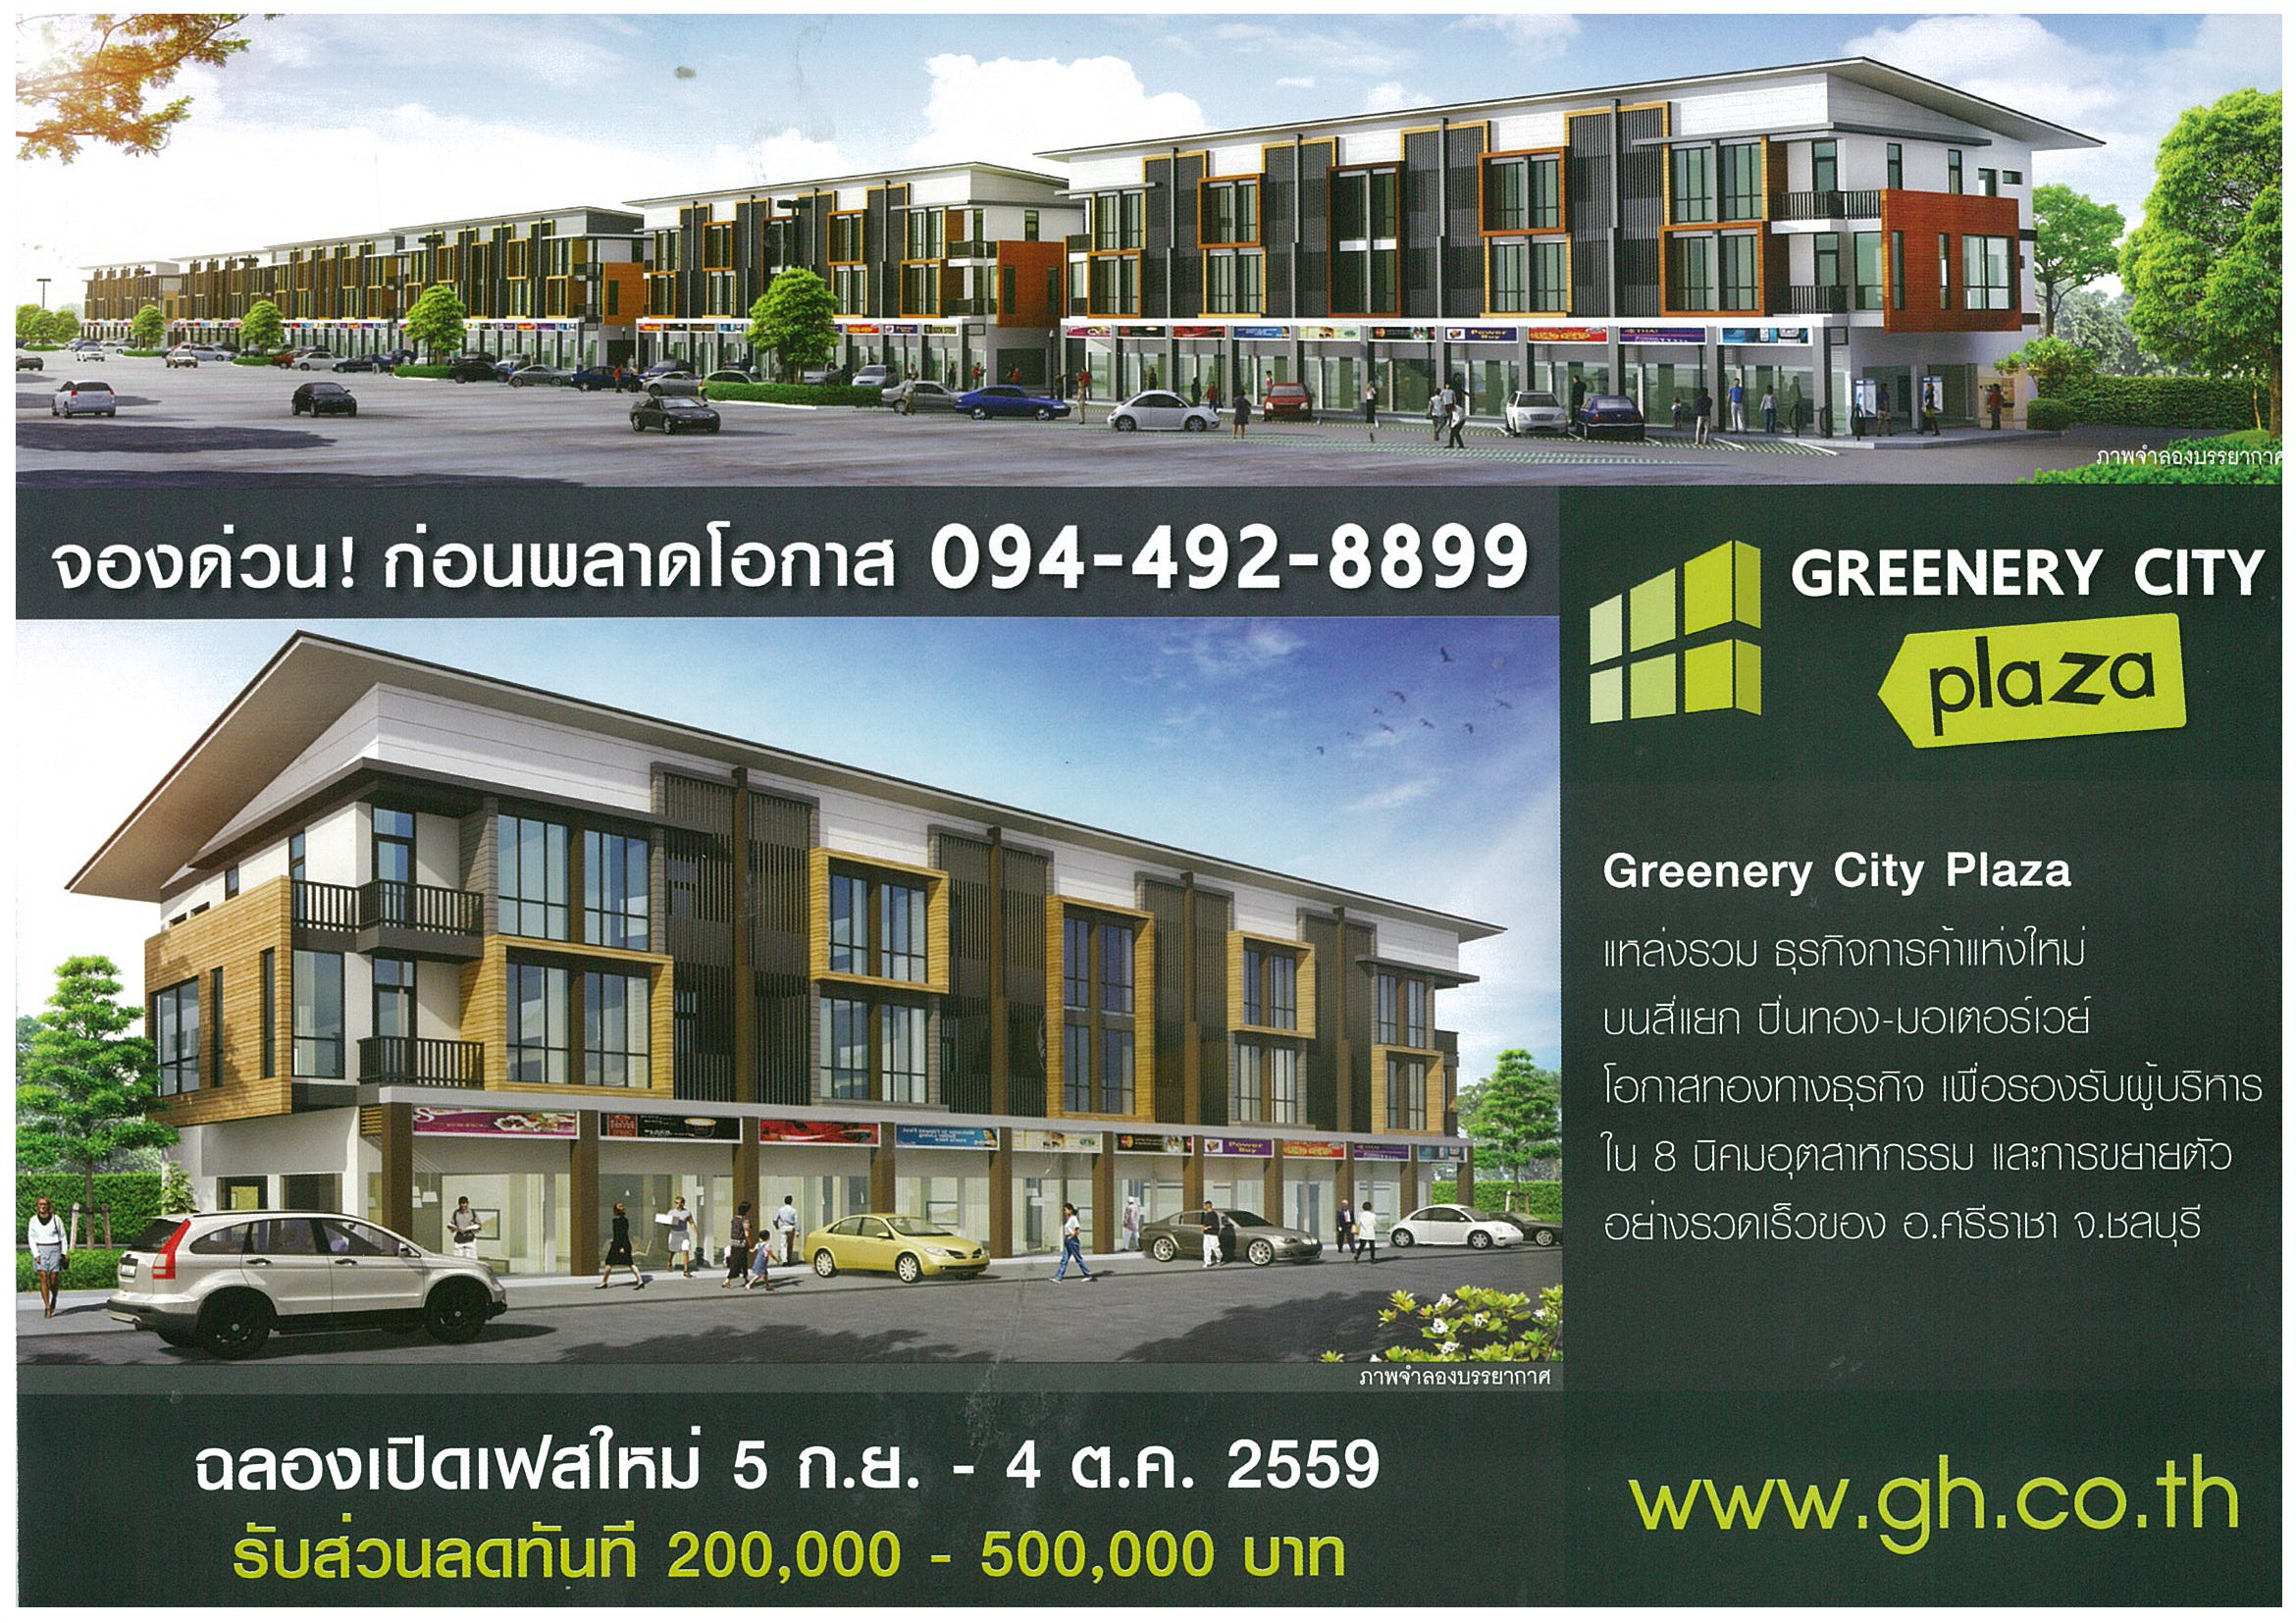 greenery-city-%e0%b8%9b%e0%b8%b4%e0%b9%88%e0%b8%99%e0%b8%97%e0%b8%ad%e0%b8%87-1_page_2